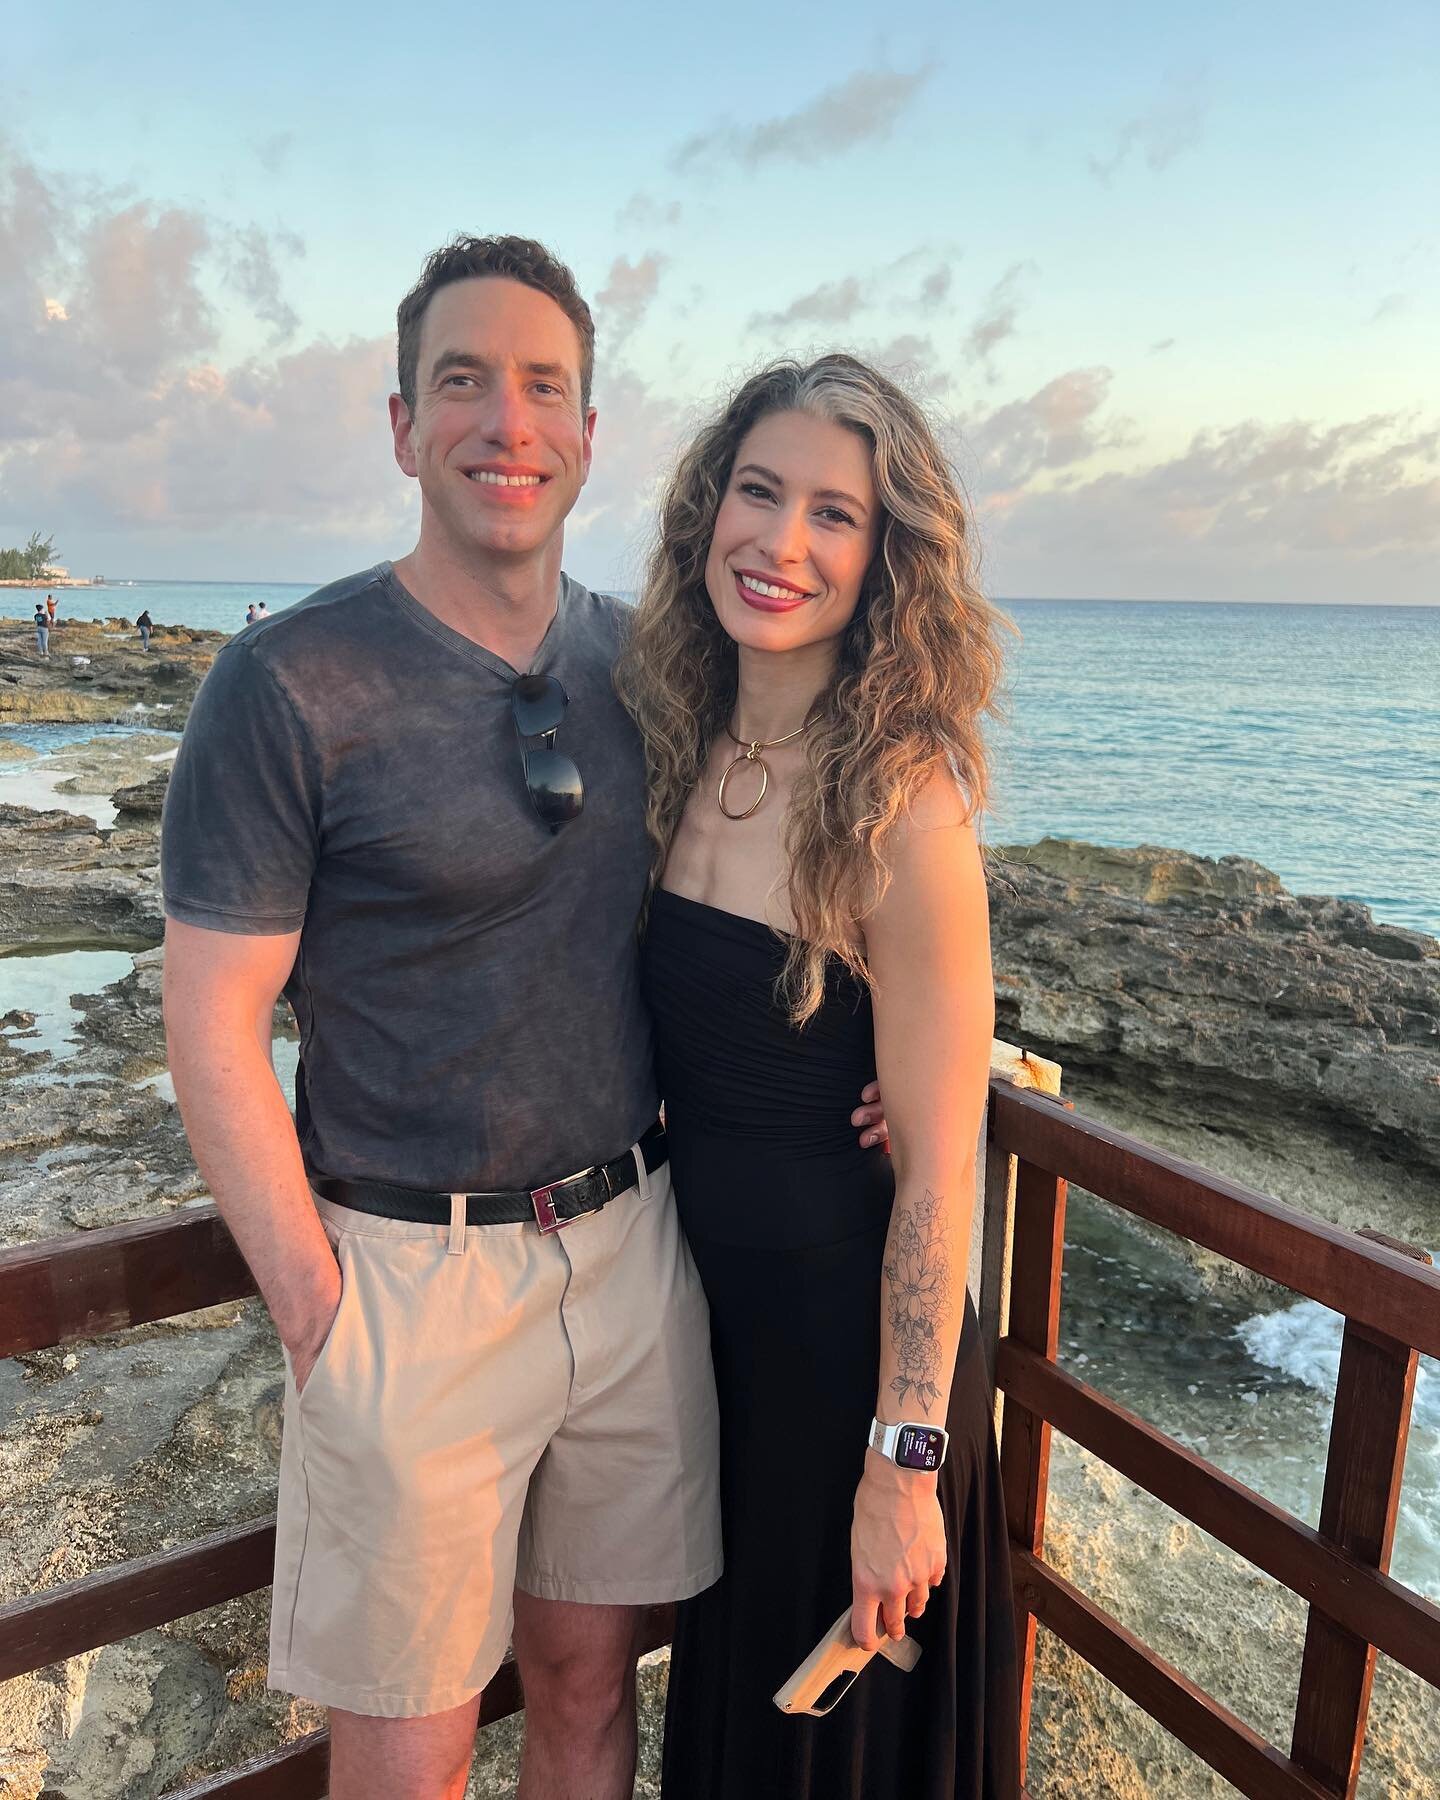 Hello Dreamcatcher Ranch friends! Sorry we&rsquo;ve been quiet here for a few weeks but we are getting into the full swing of summer . Currently we are just returning from a stay @ritzcarltongrandcayman which was fabulous! But I&rsquo;ve got to say, 